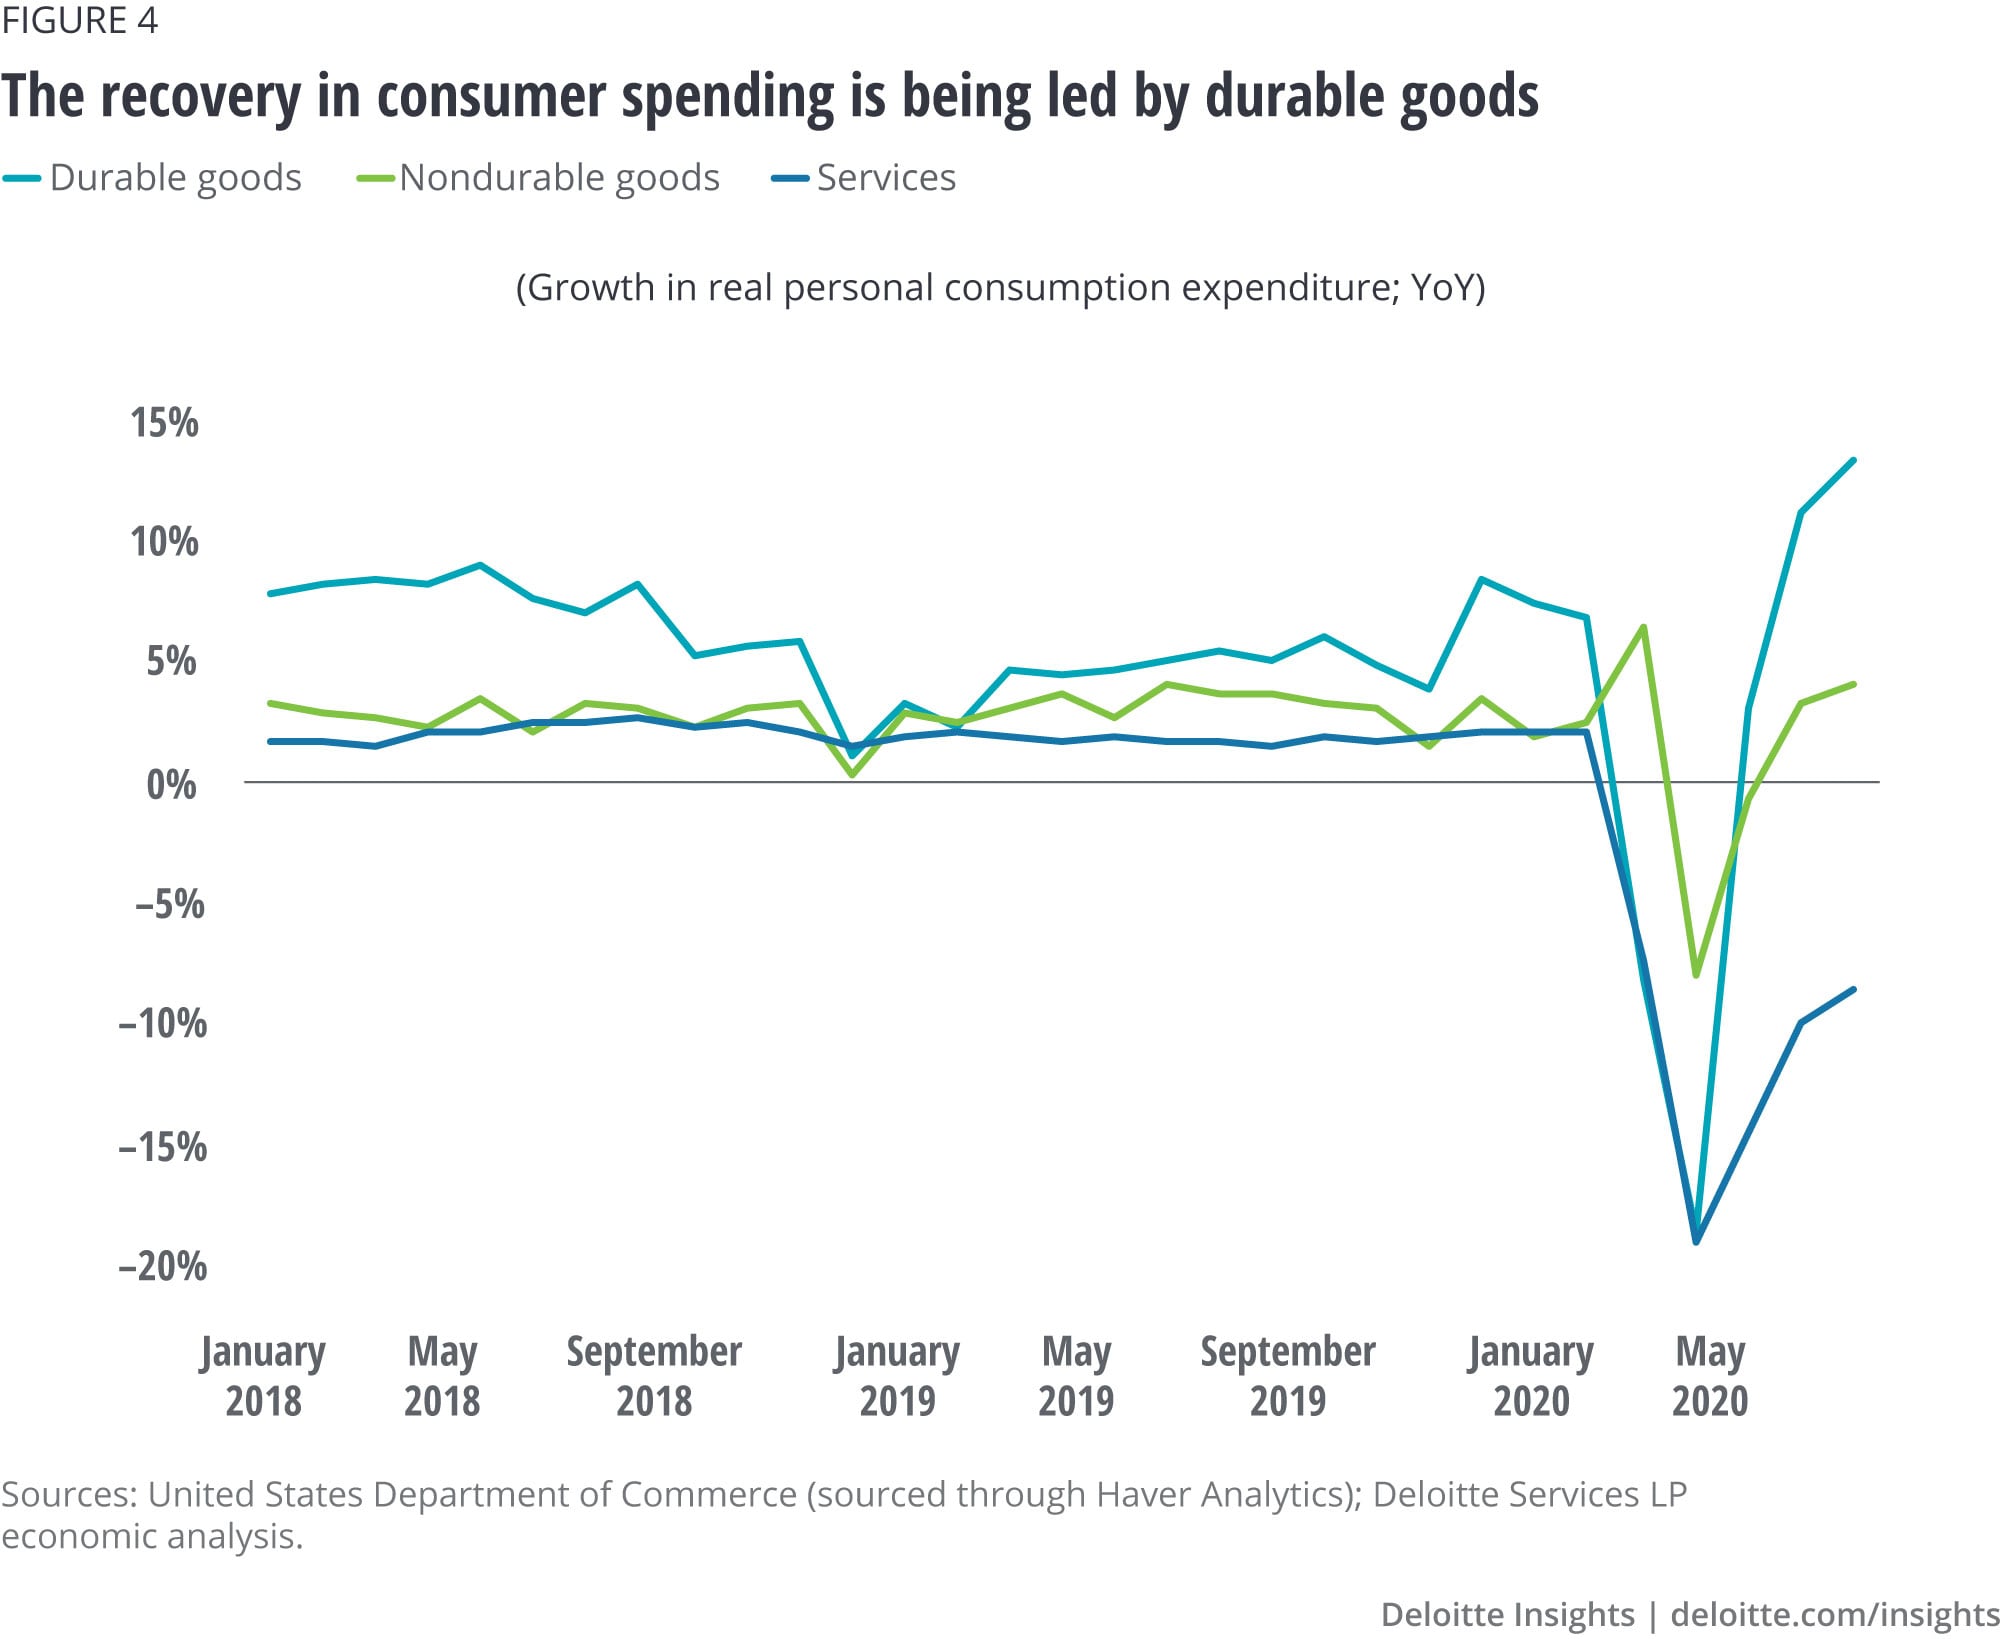 The recovery in consumer spending is being led by durable goods